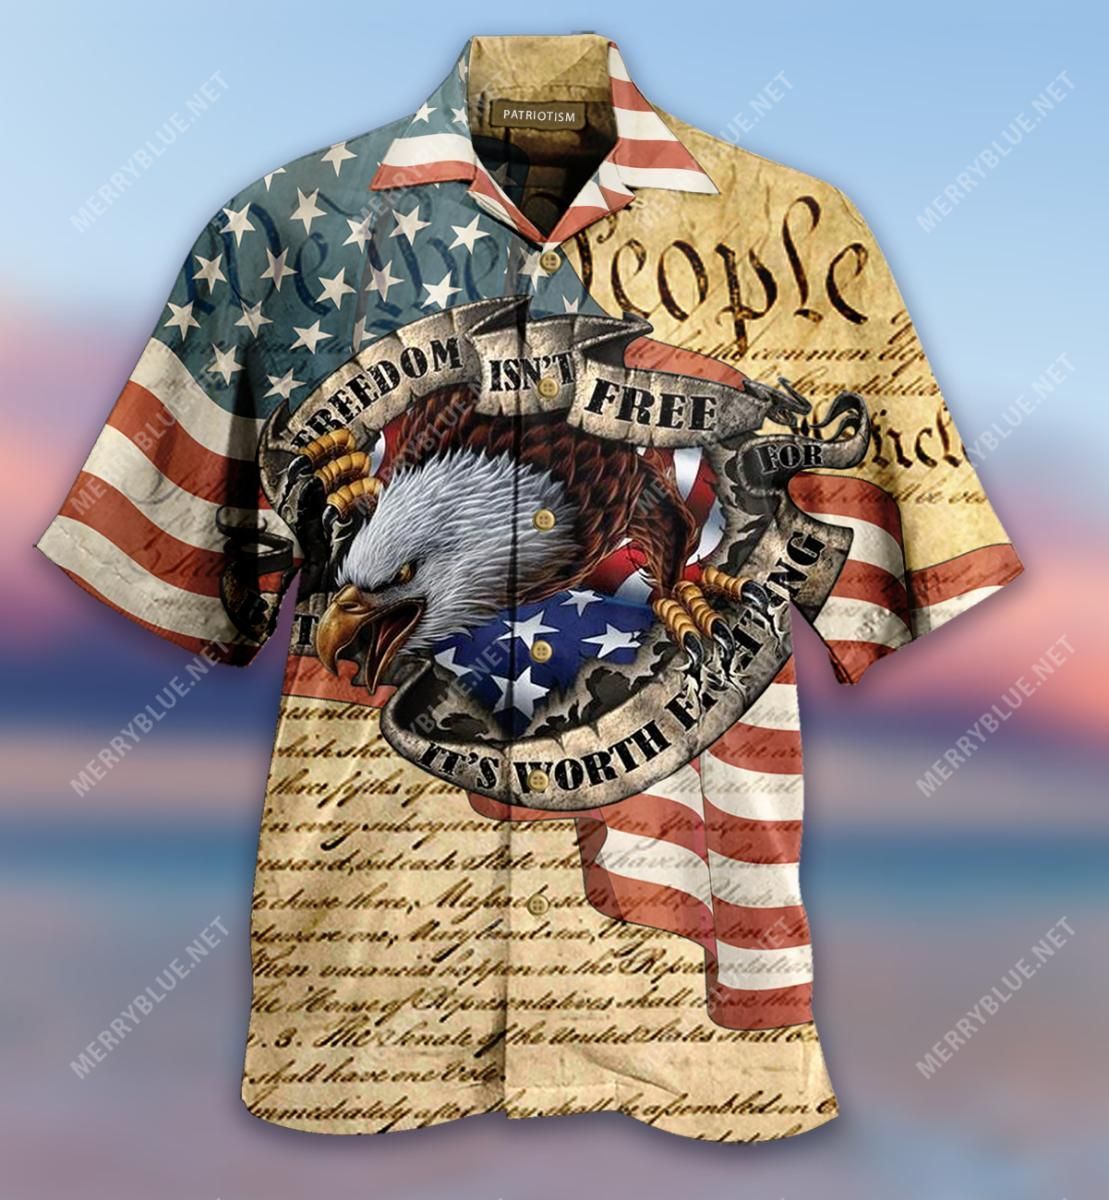 Freedom Isn'T Free But It'S Worth Fighting For Aloha Hawaiian Shirt Colorful Short Sleeve Summer Beach Casual Shirt For Men And Women